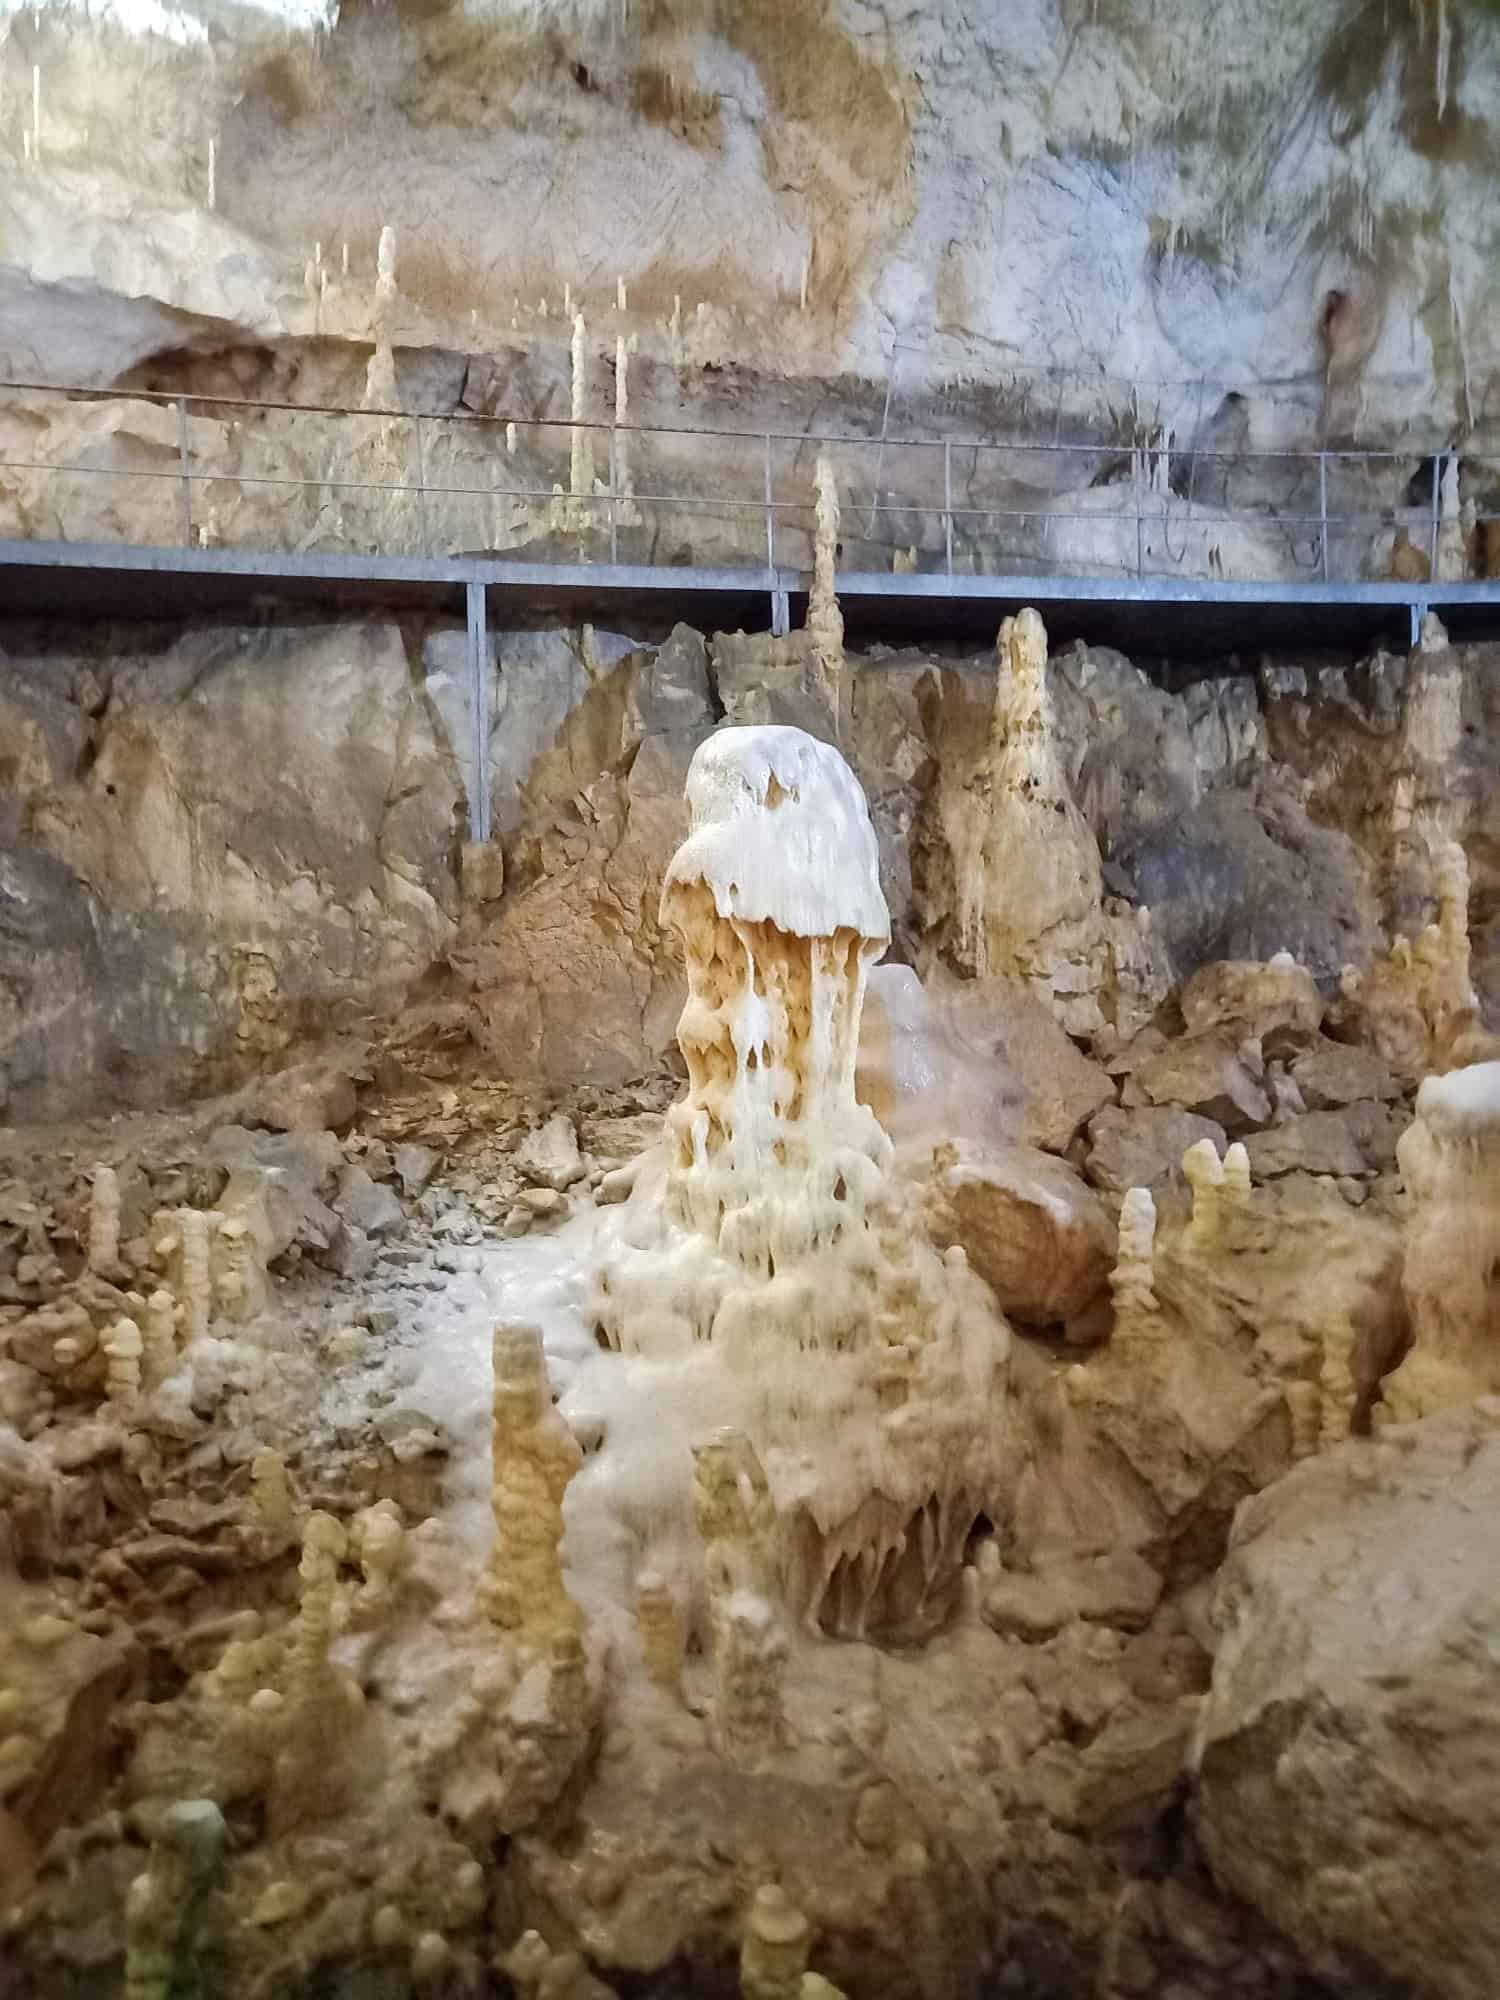 The Bears' Cave in Romania is home to an abundance of stunning stalactites and stalagmites.